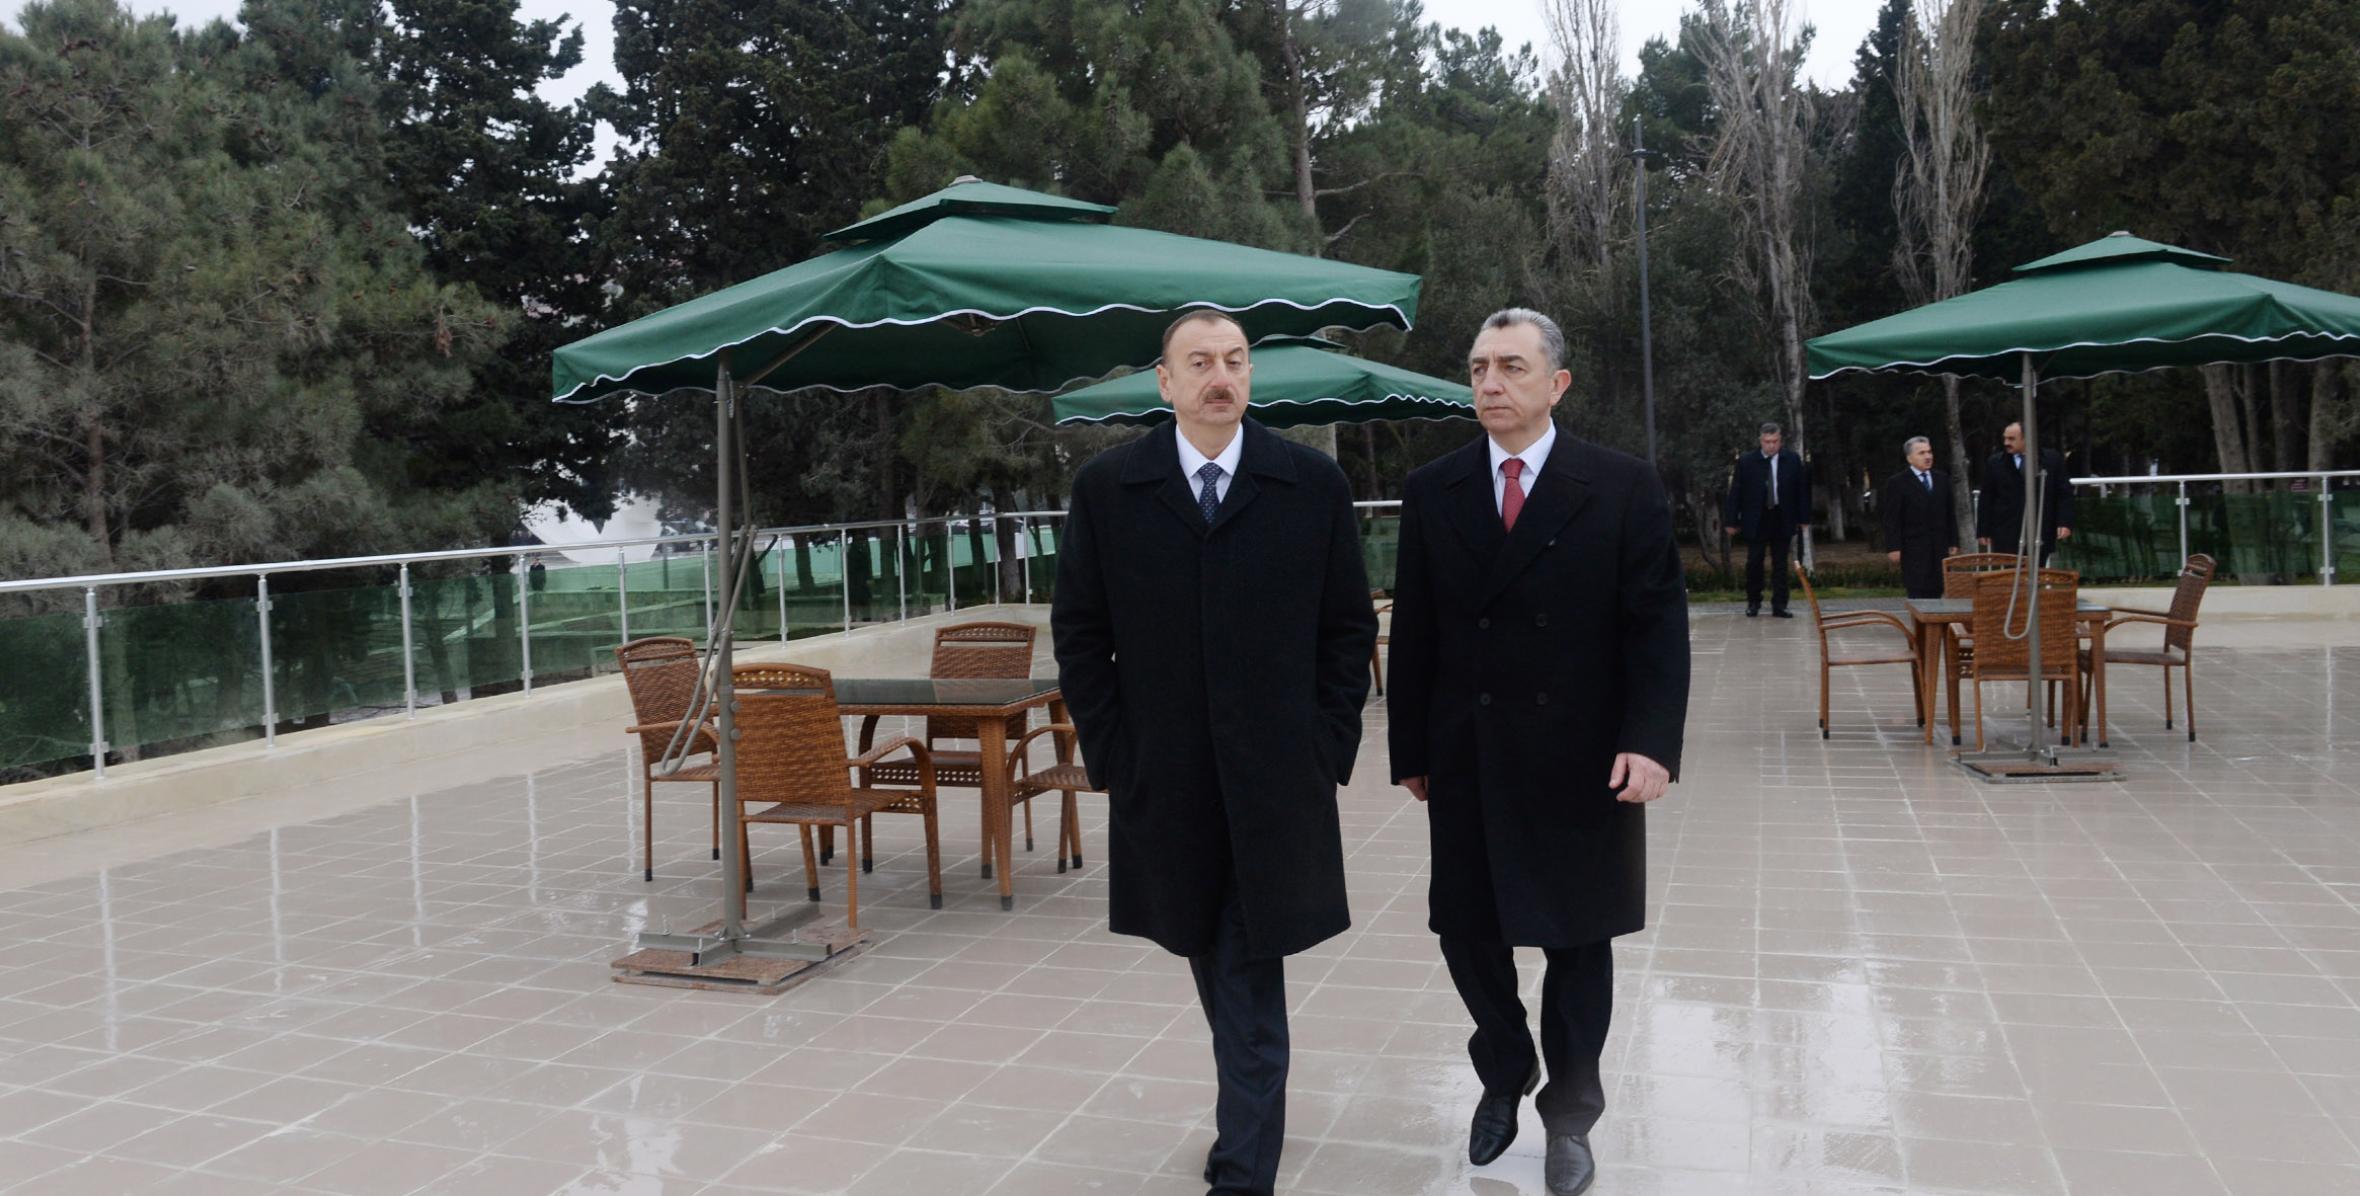 Ilham Aliyev familiarized himself with the course of large-scale improvement and reconstruction work at the Nasimi recreational park in Sumgayit